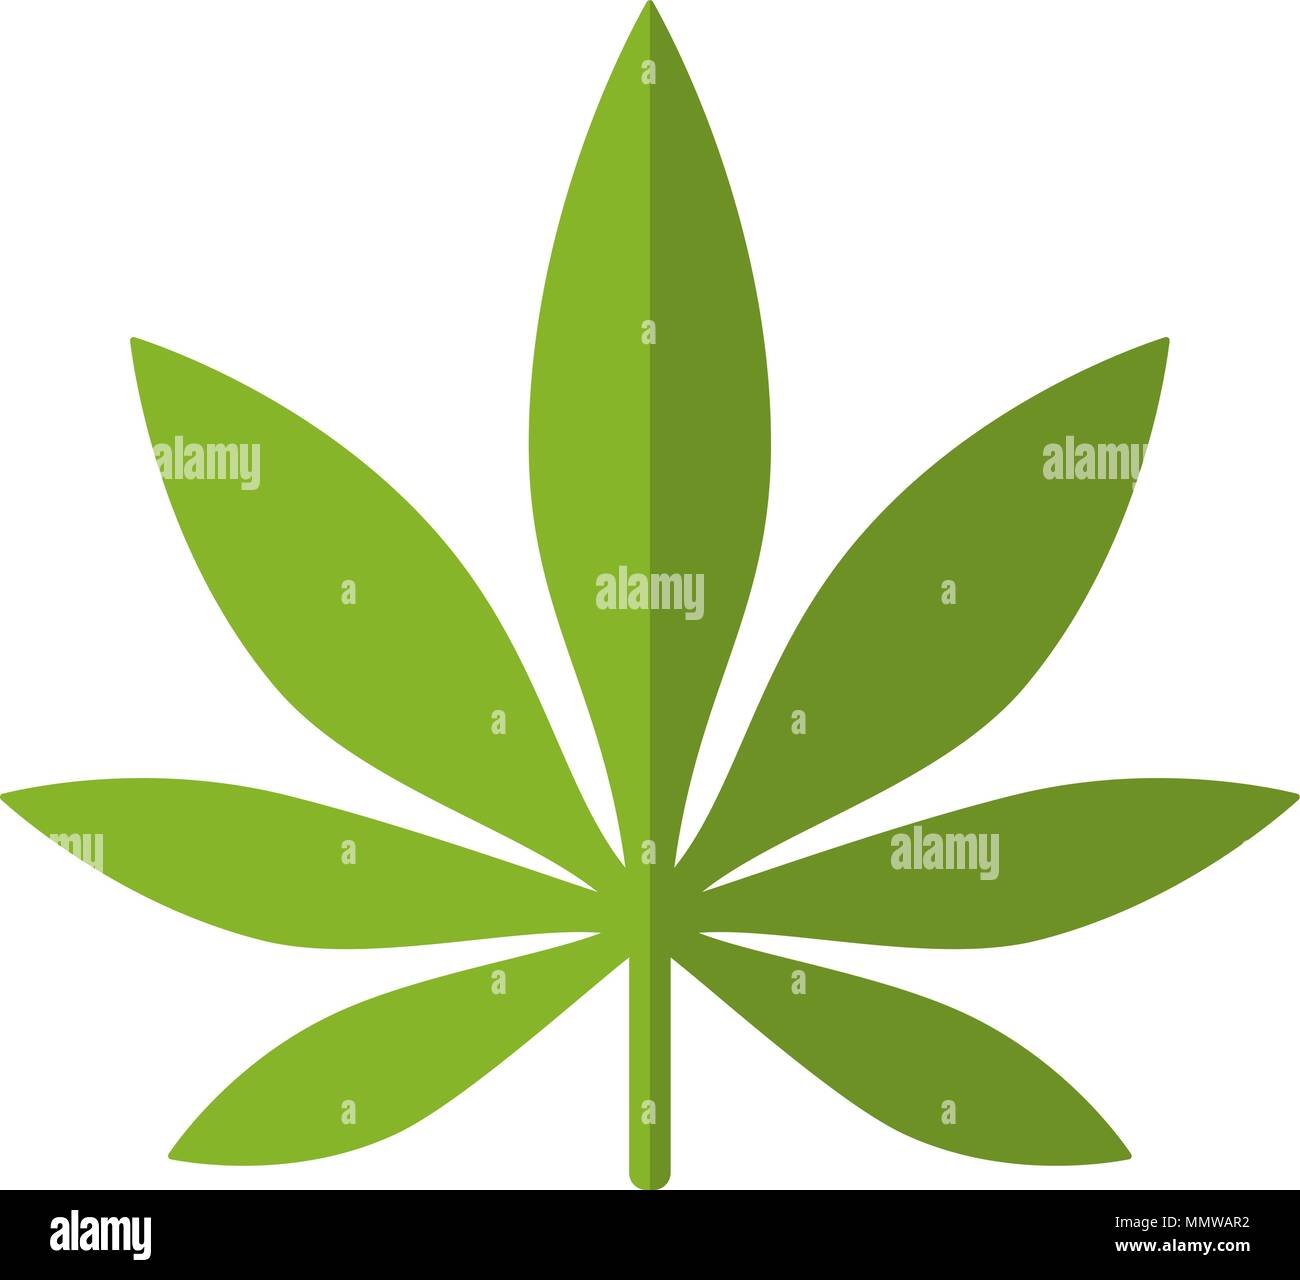 Marijuana or cannabis leaf Icon Vector Logo Template. Isolated illustration on white background. Stock Vector